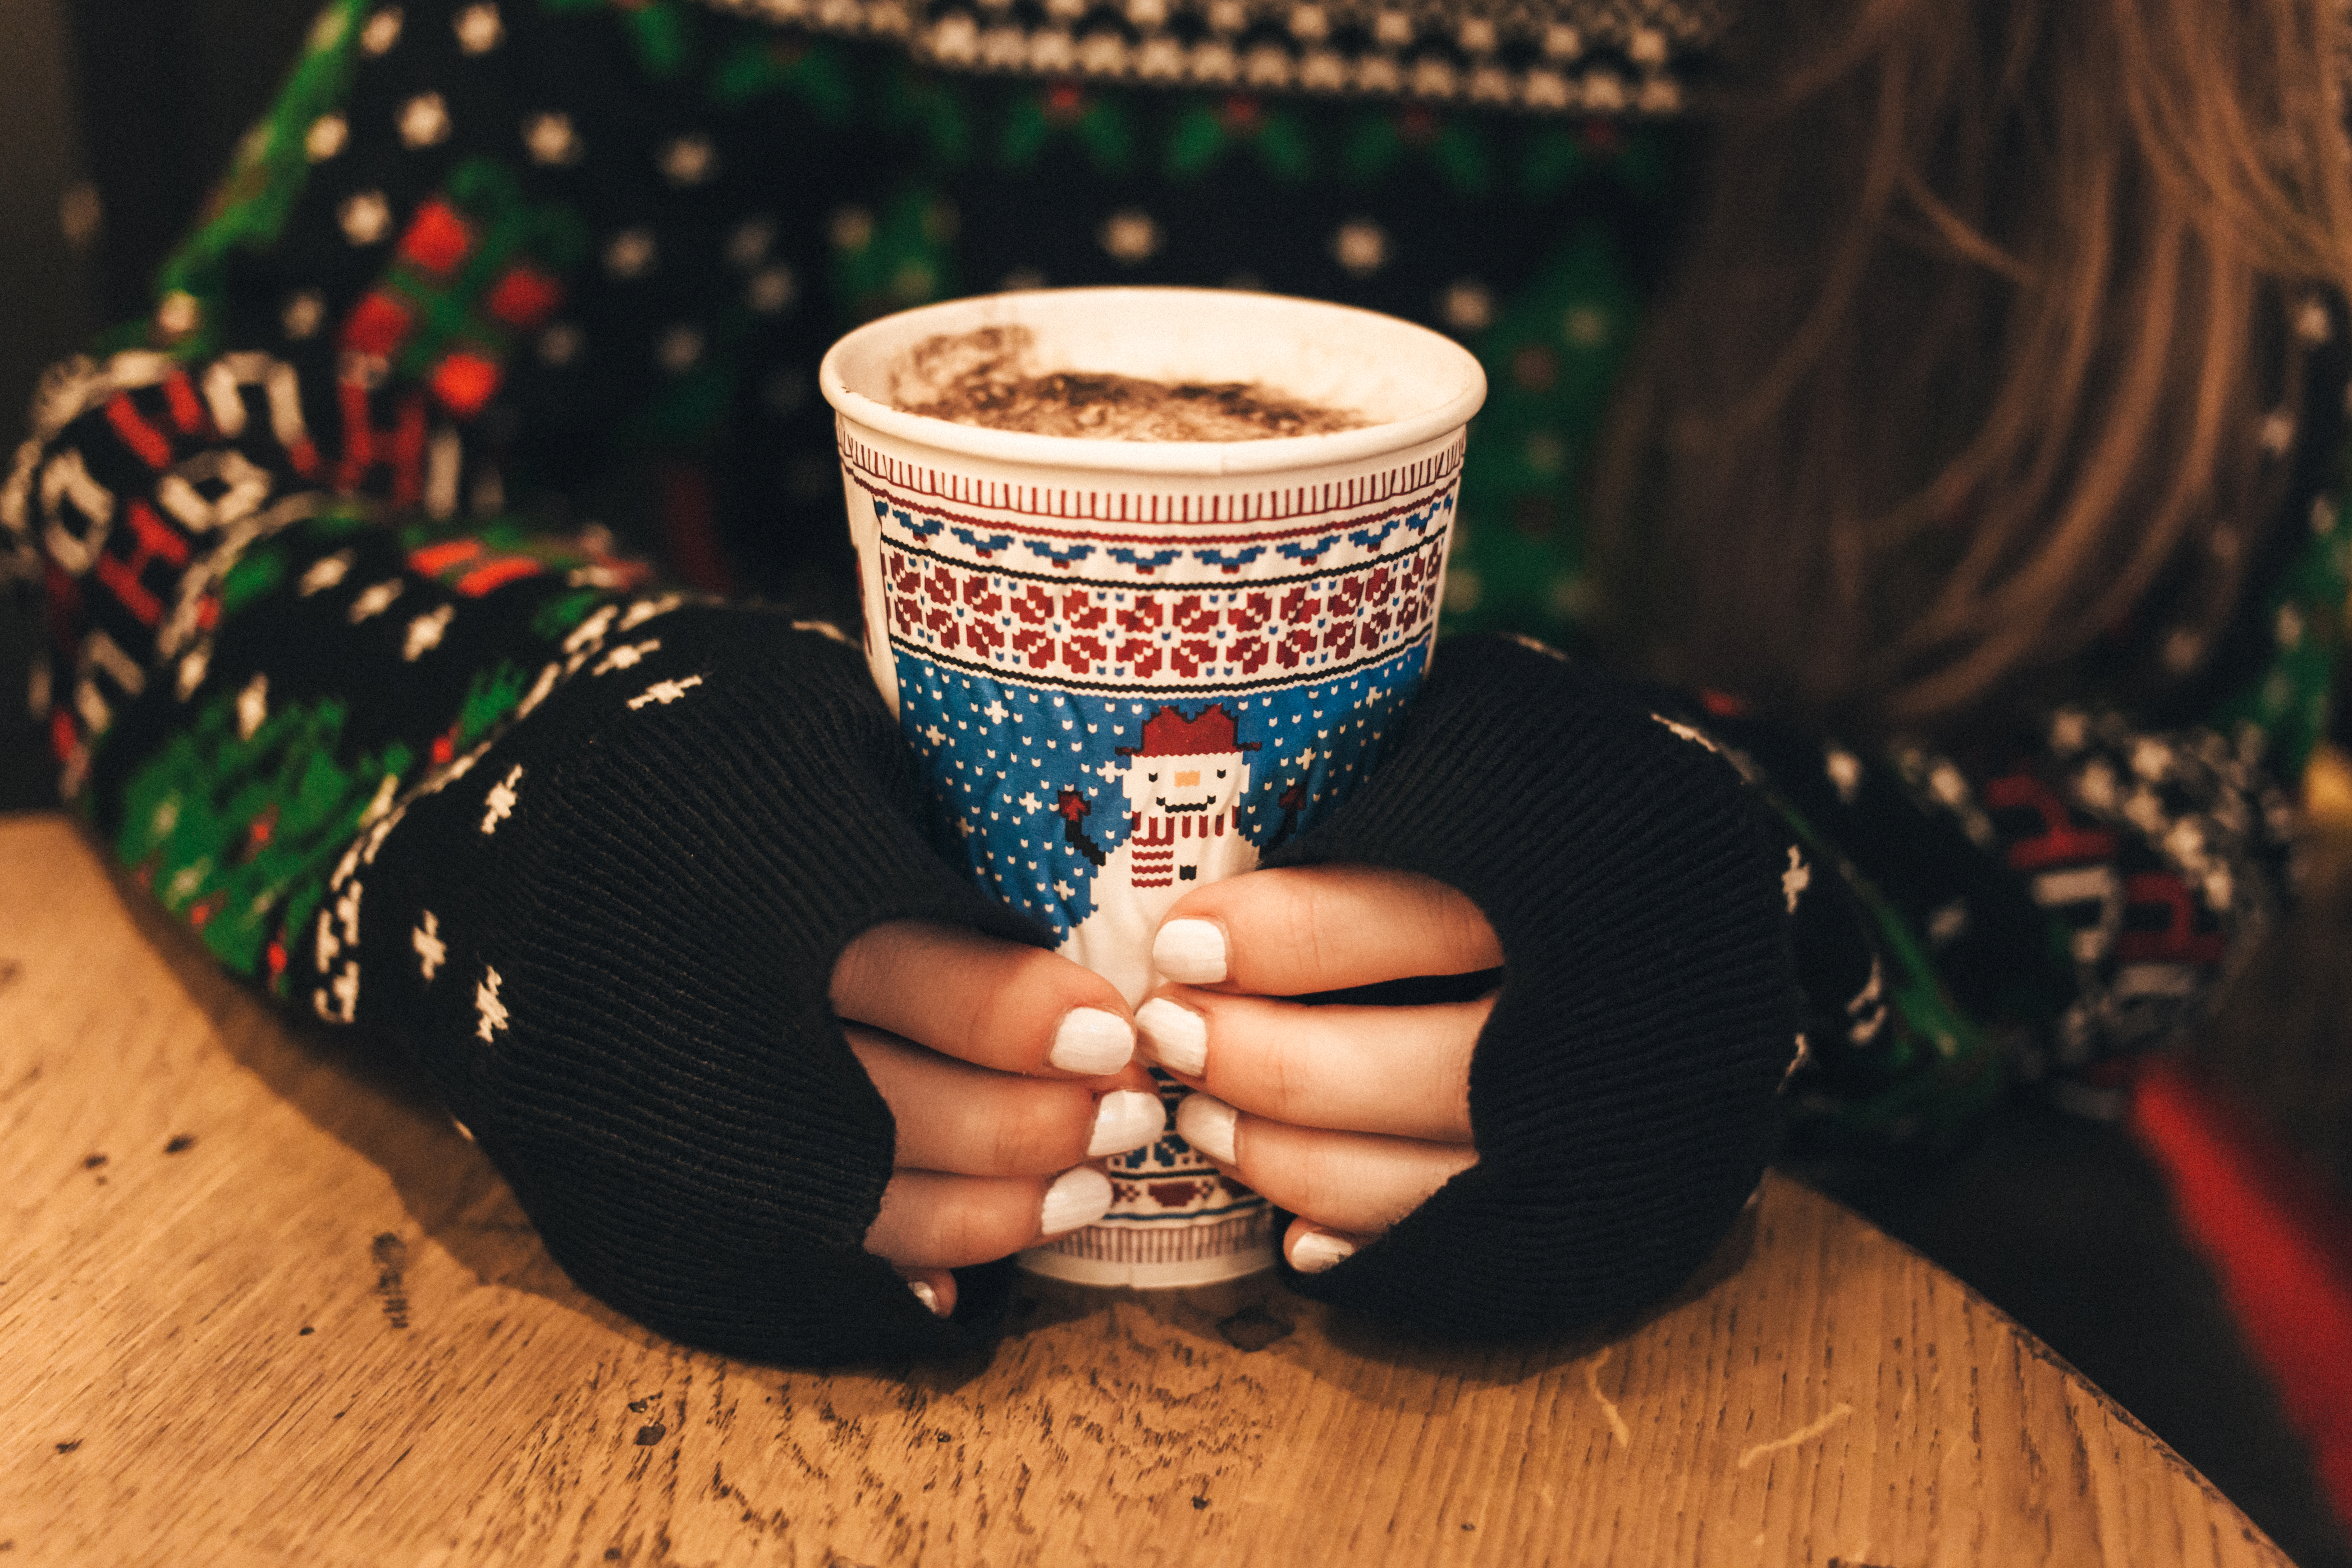 153389 download wallpaper coffee, food, christmas, hands, sweater screensavers and pictures for free